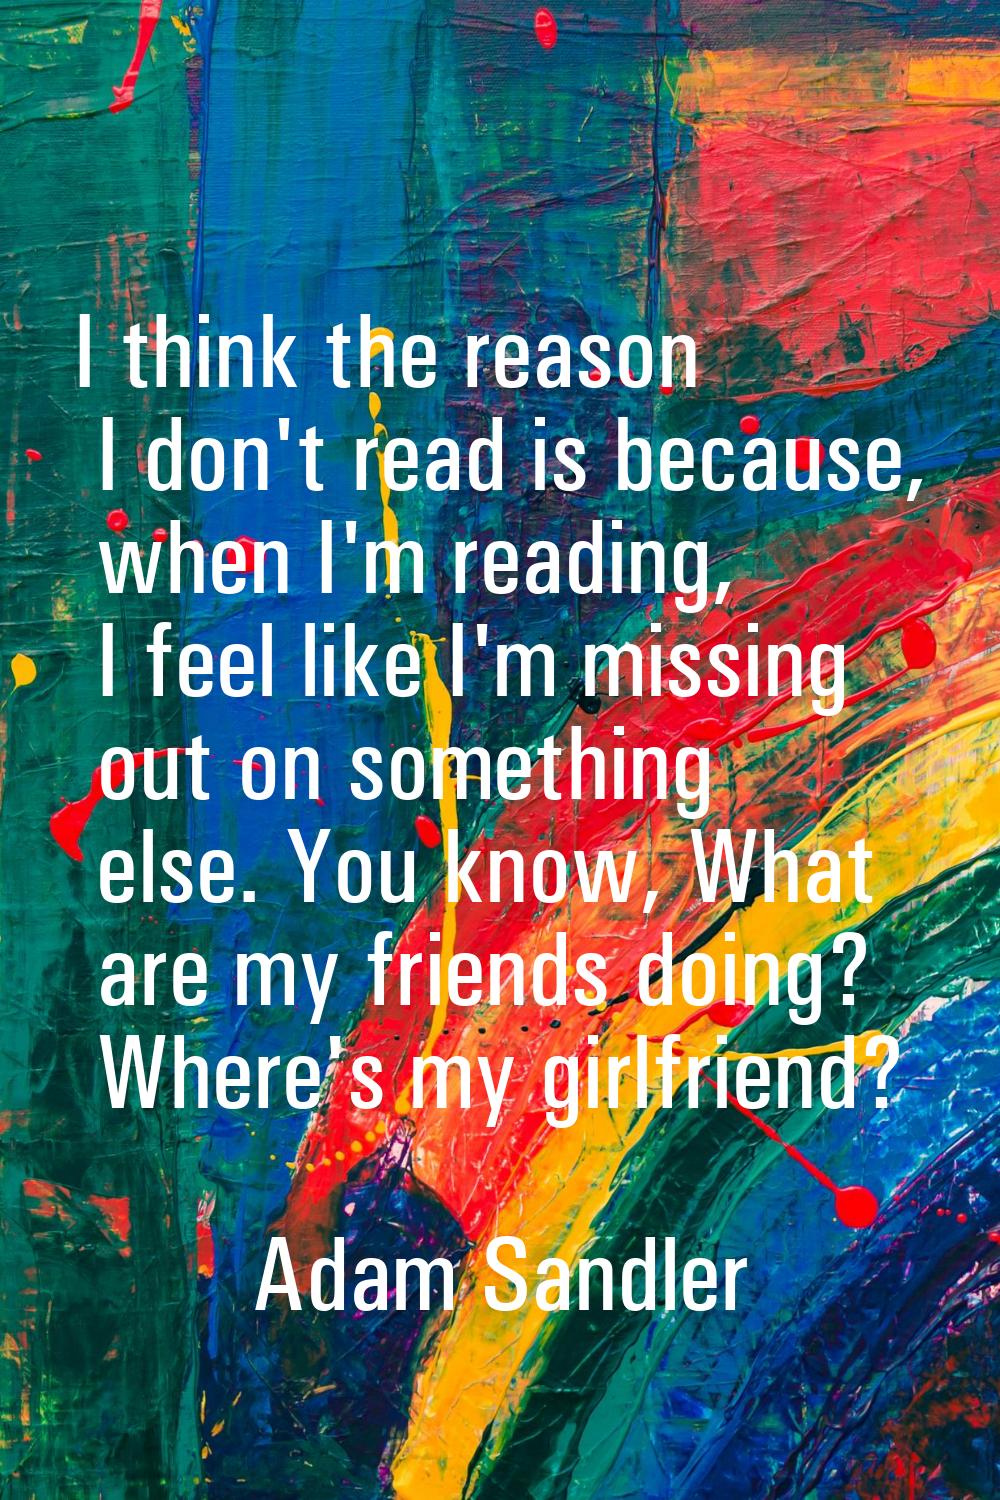 I think the reason I don't read is because, when I'm reading, I feel like I'm missing out on someth